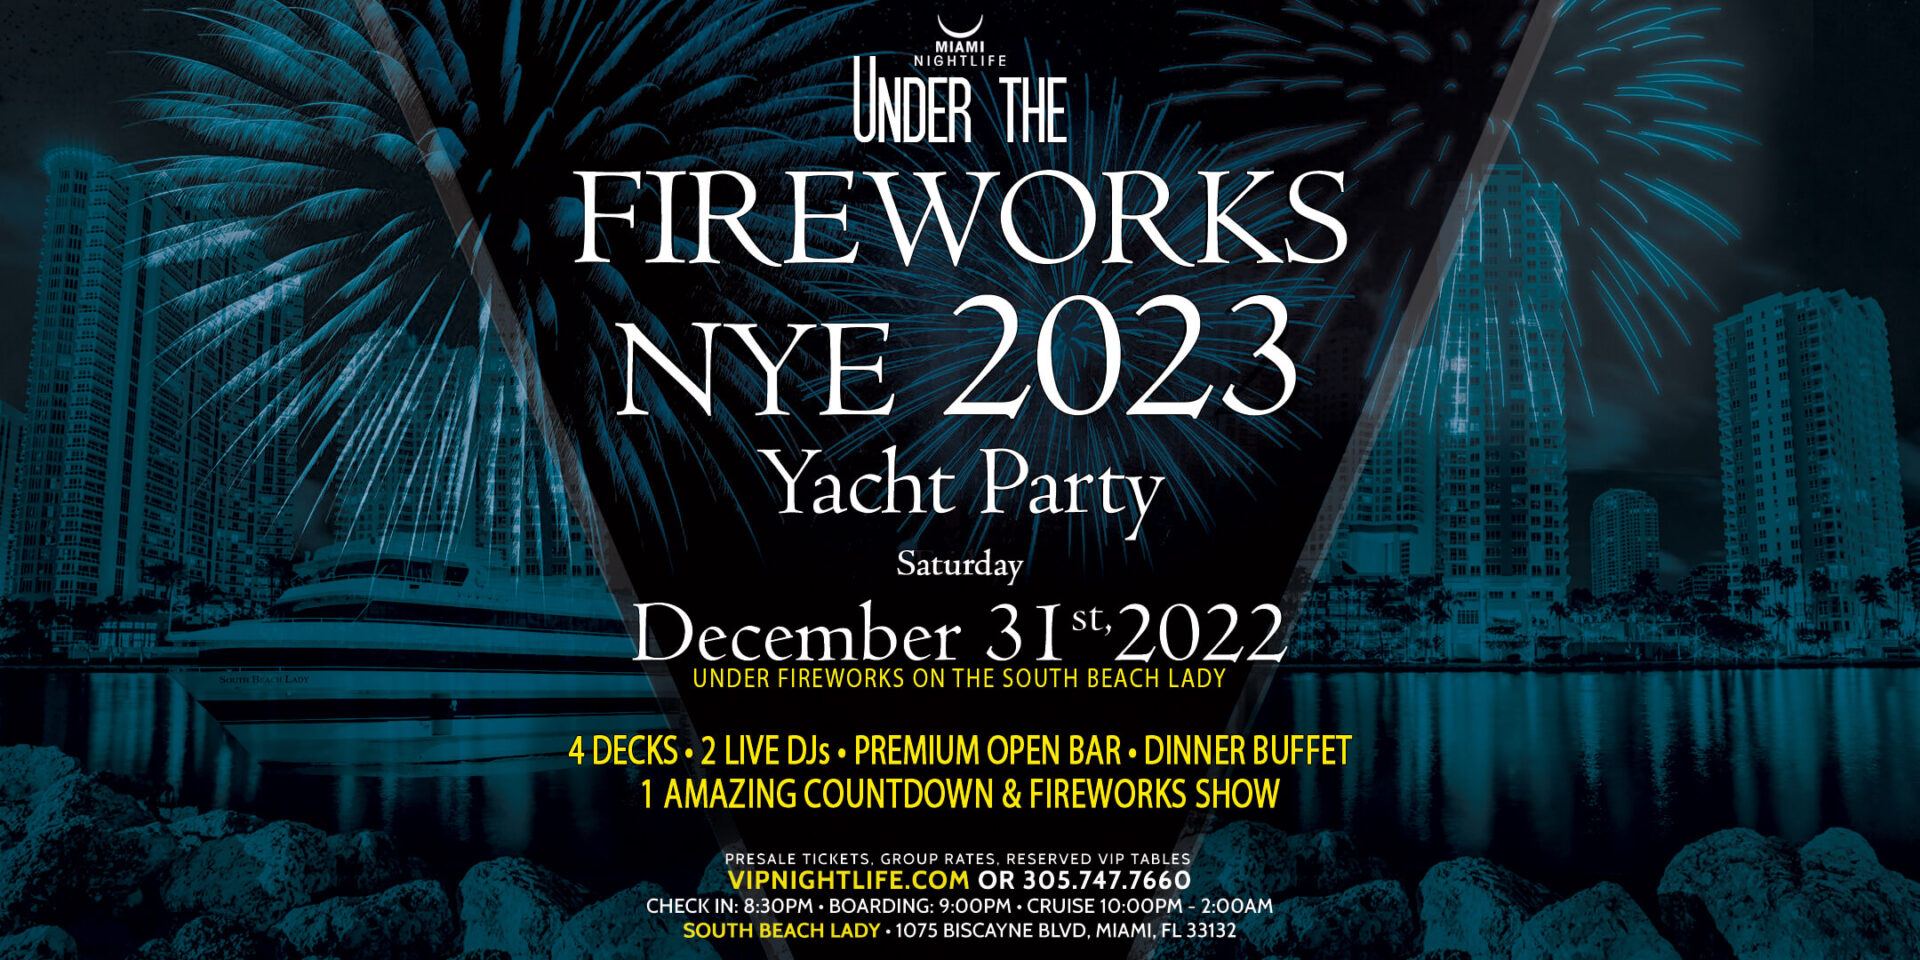 Miami Under the Fireworks Yacht Party New Year's Eve 2023 VIP Nightlife